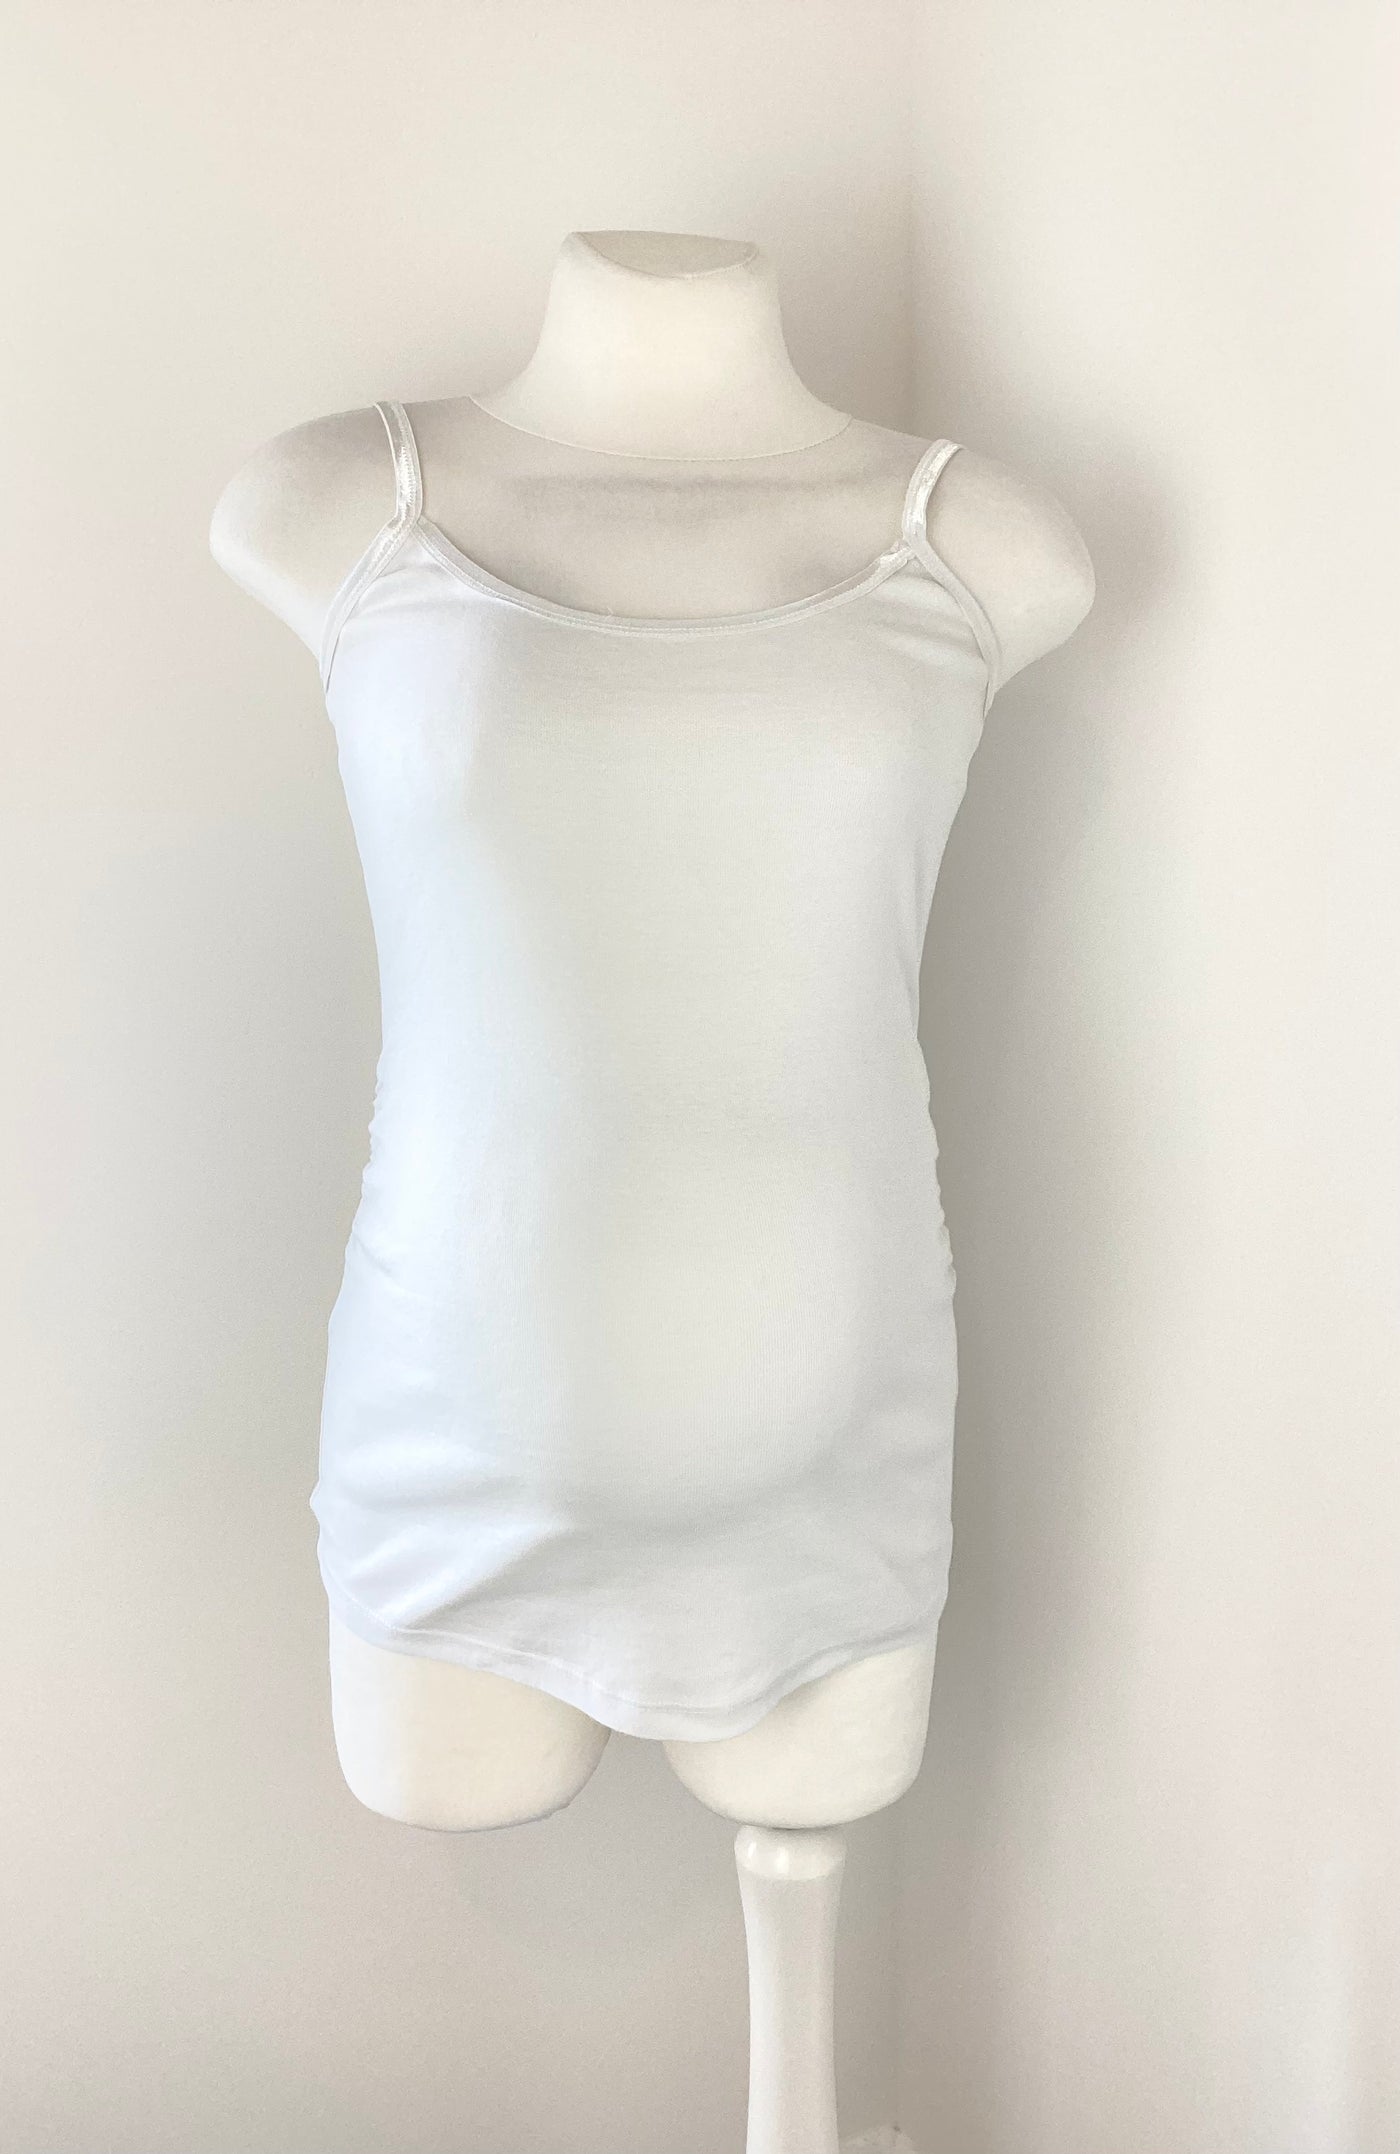 New Look Maternity white camisole maternity top - Size 10